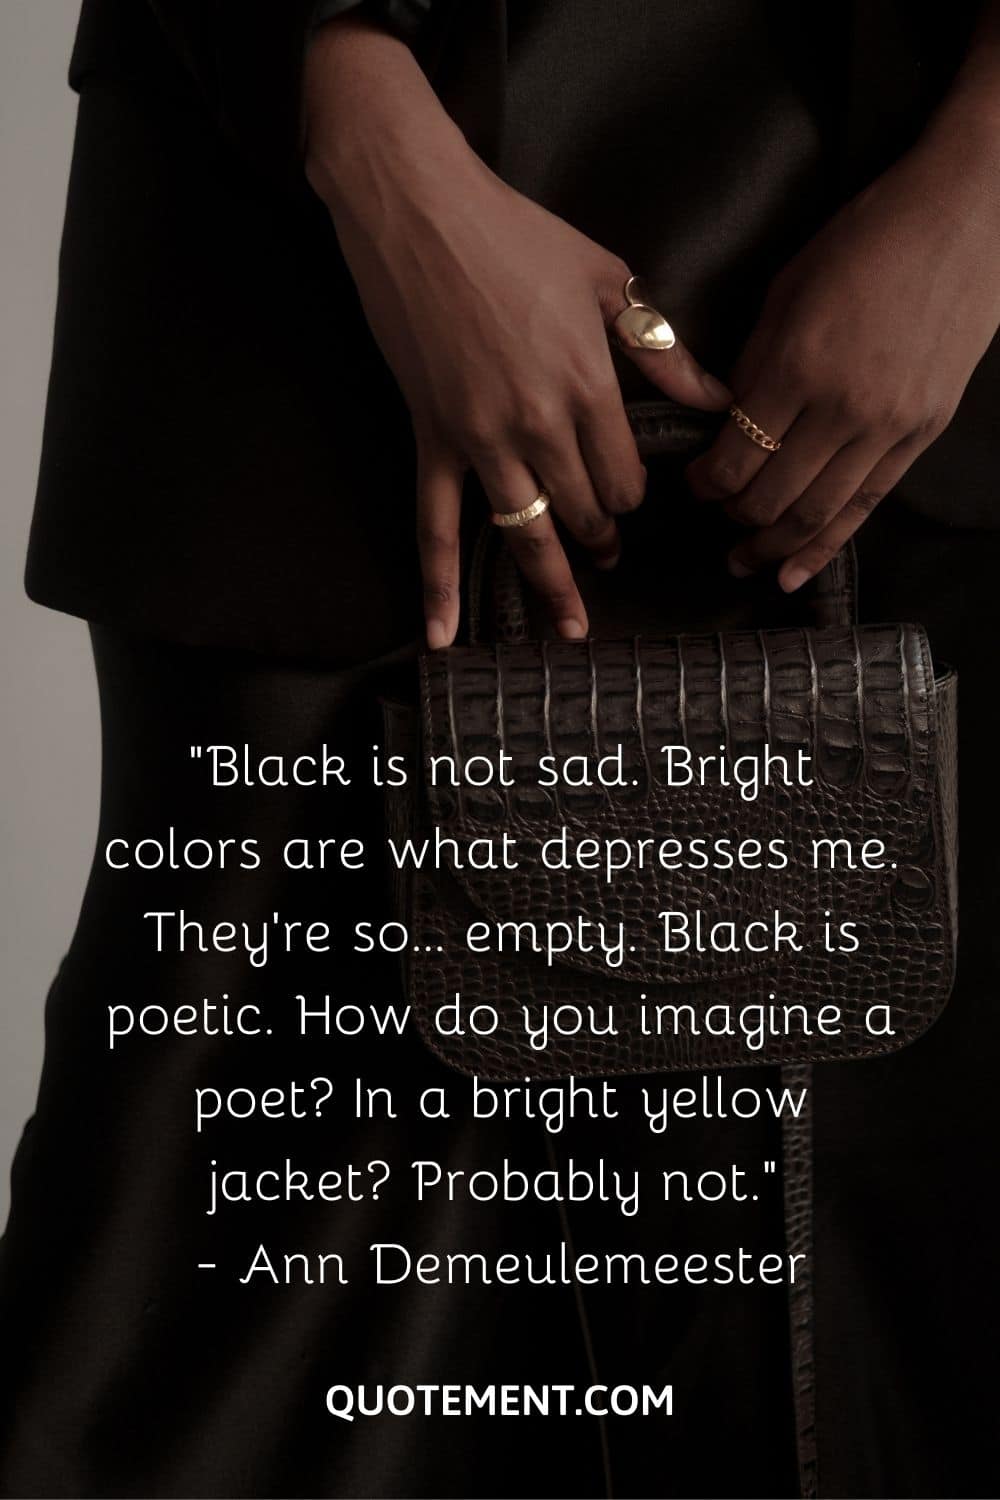 Black is not sad. Bright colors are what depresses me